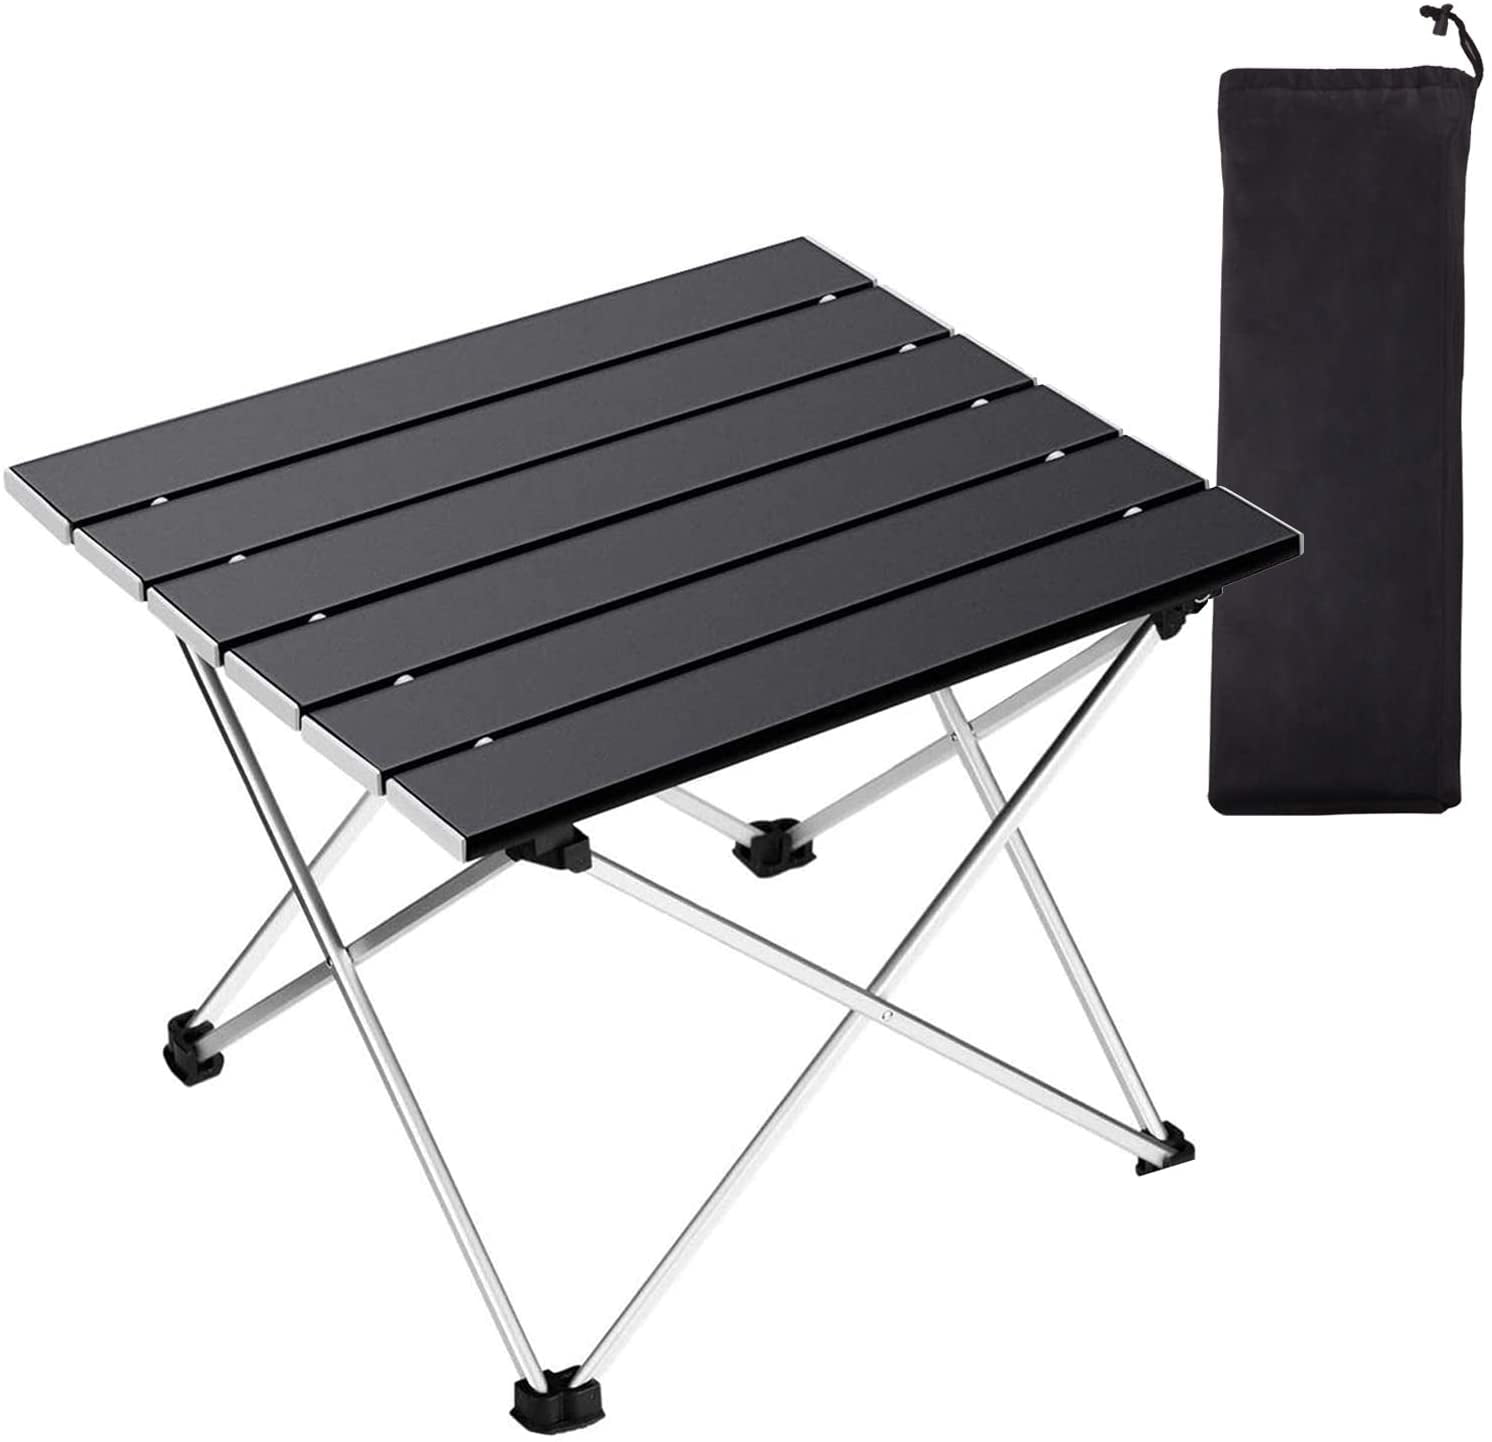 Portable Small Aluminum Folding Table Lightweight for Outdoor Camping Picnic 